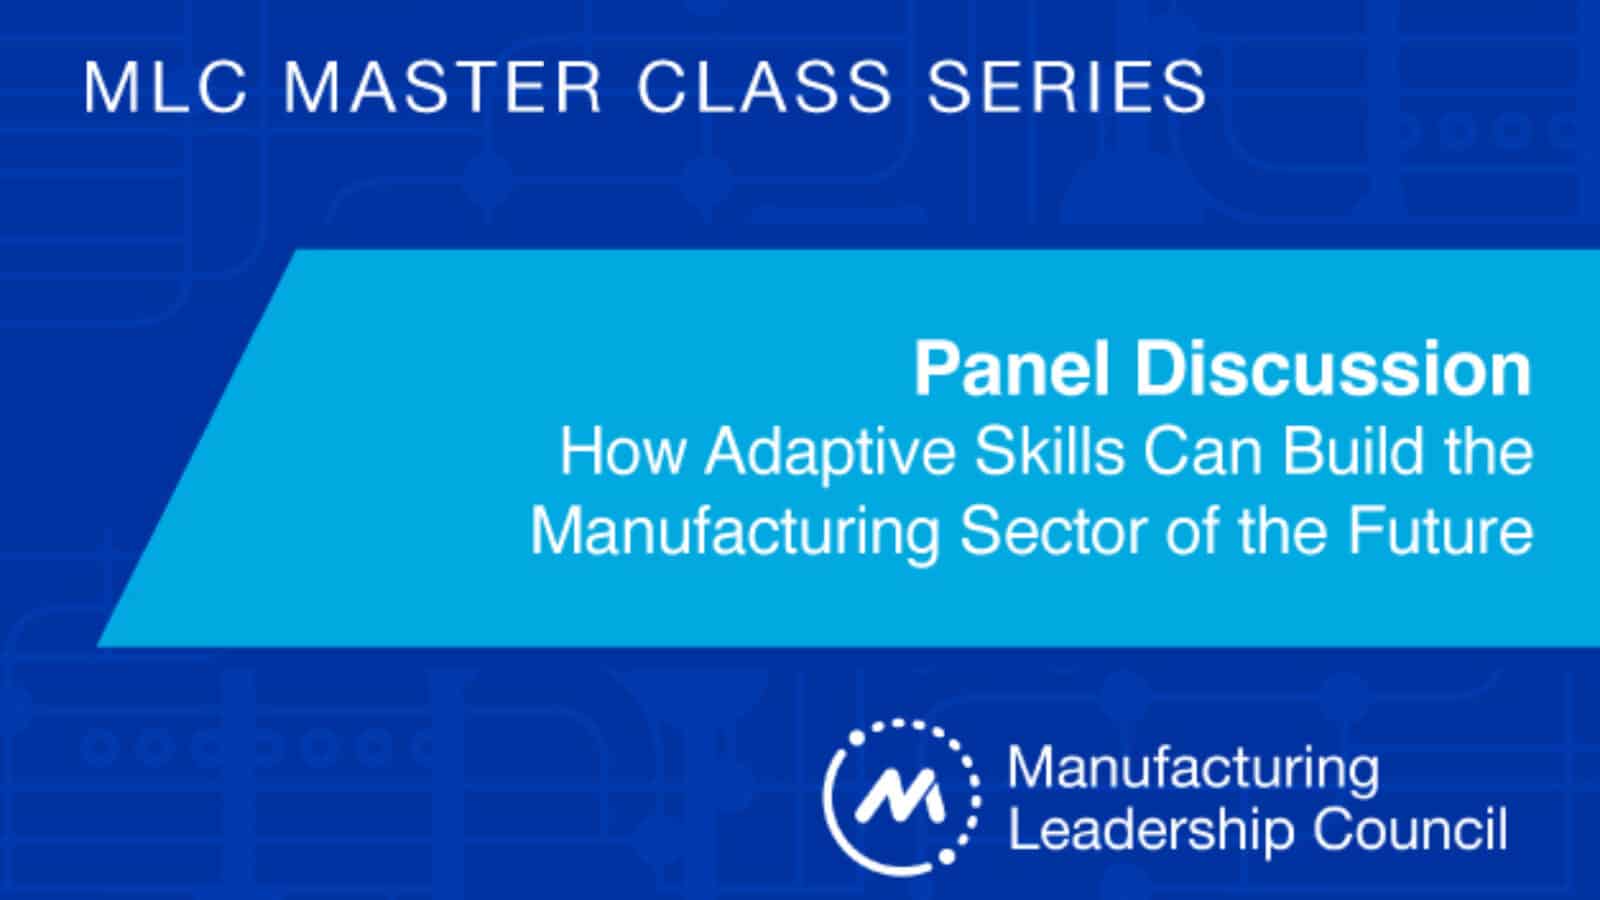 Master Class: How Adaptive Skills Can Build the Manufacturing Sector of the Future